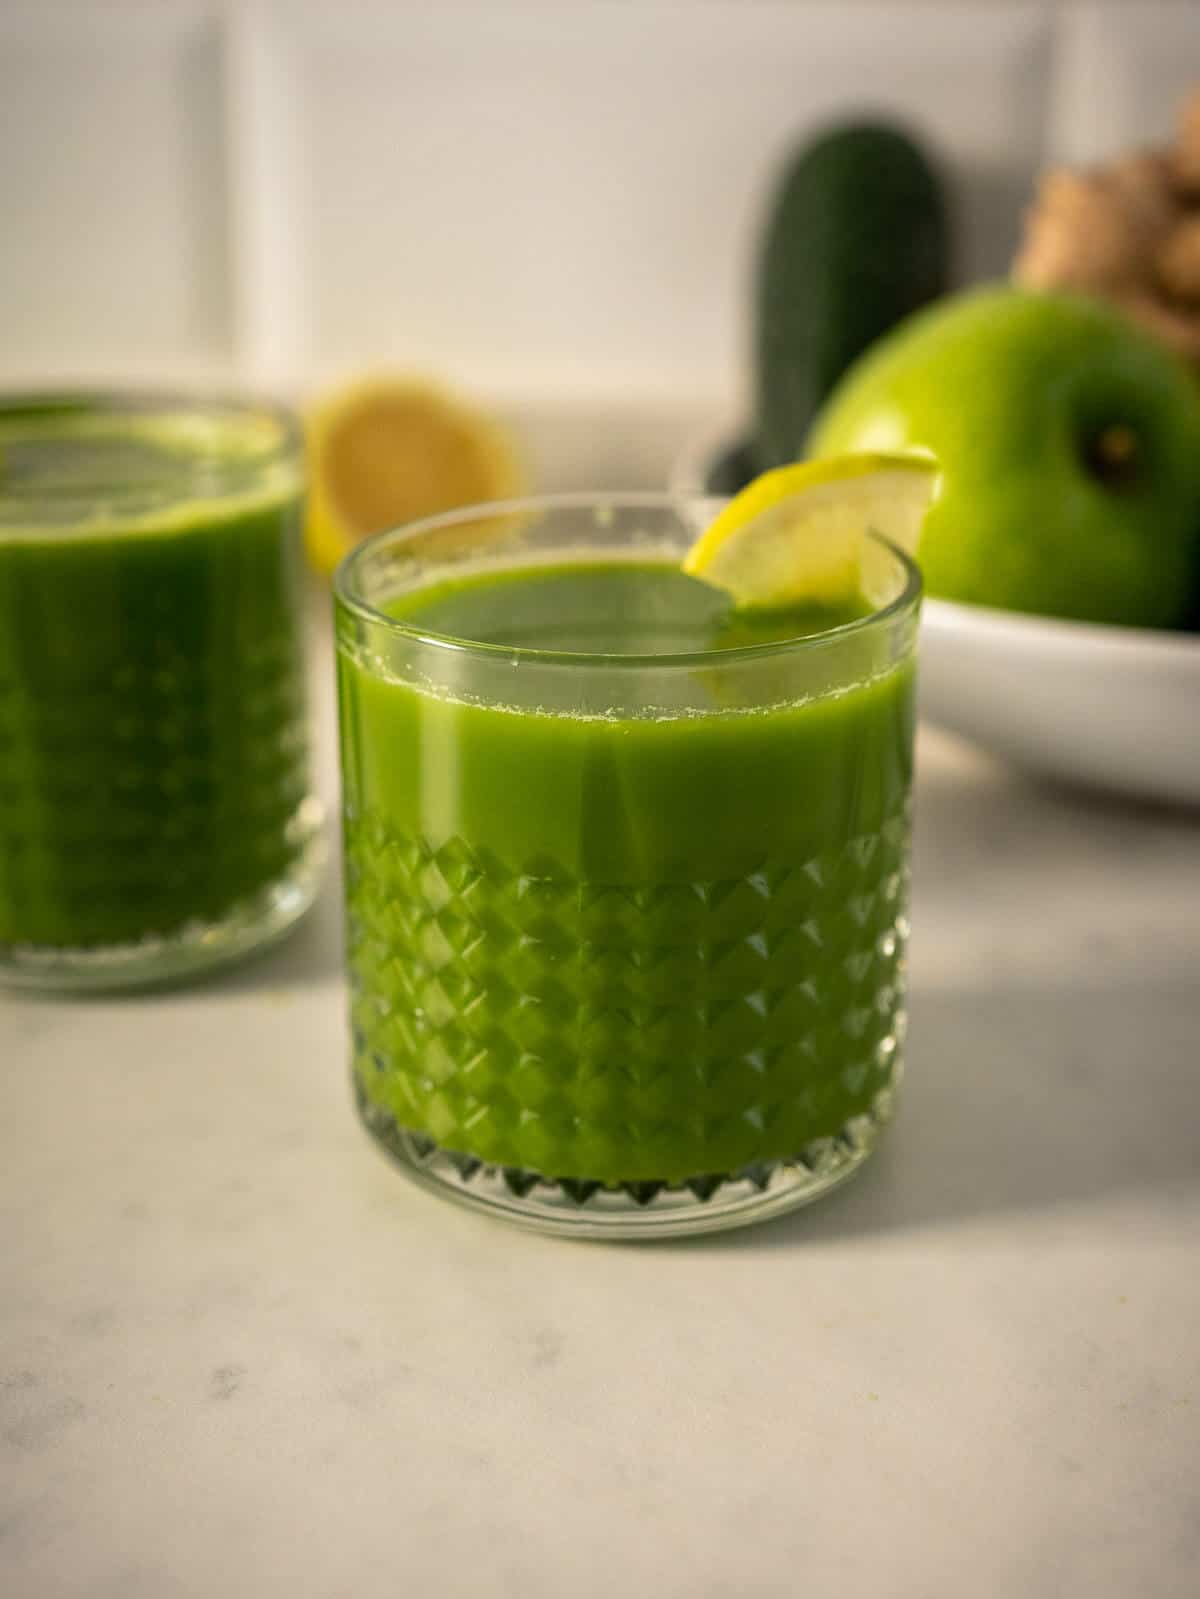 Hydrating Spinach and Green Mean apple juice.